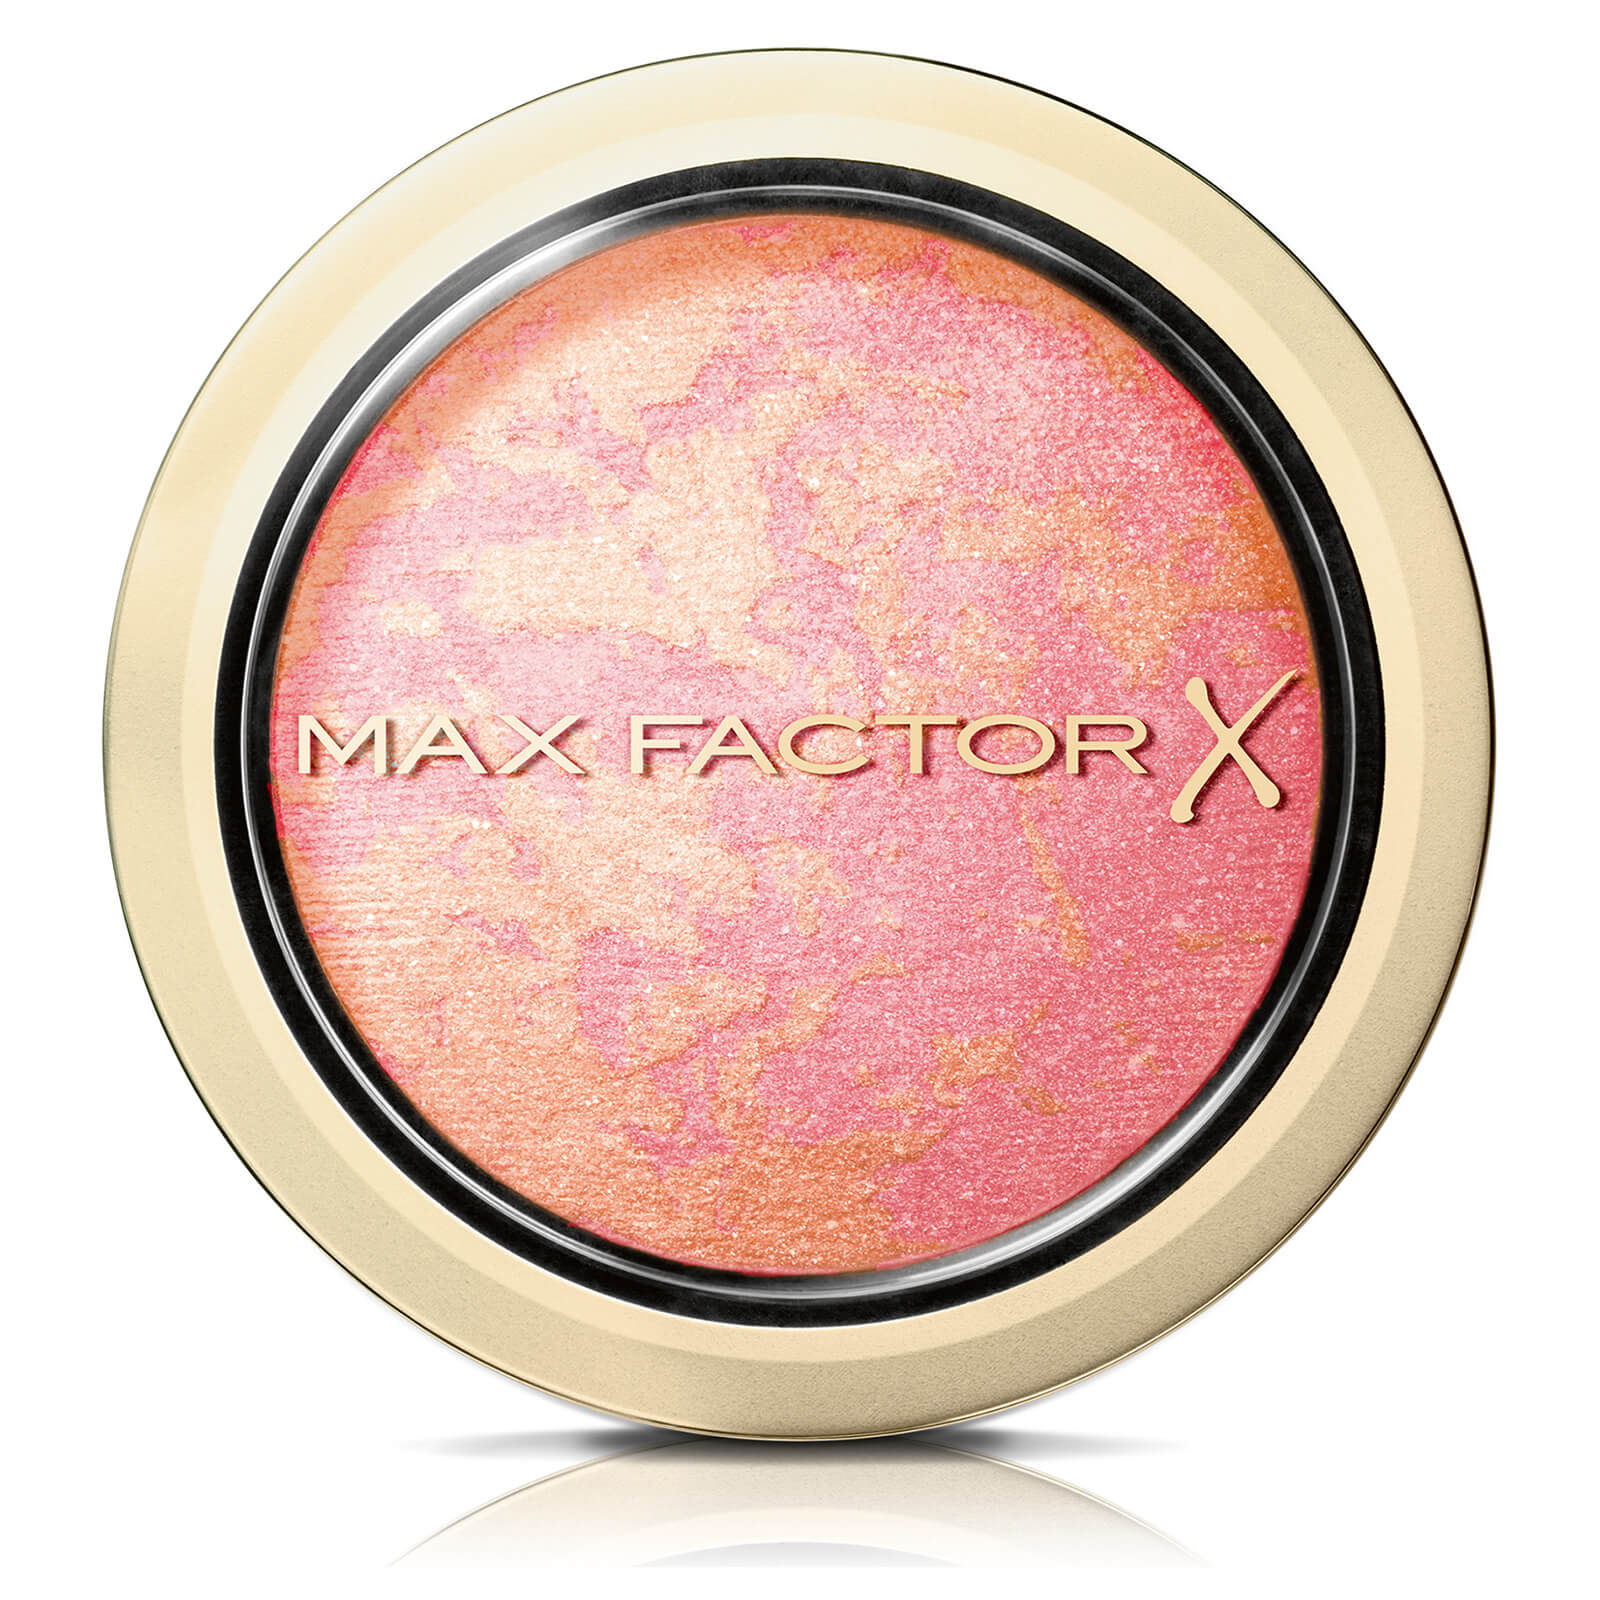 Max Factor Creme Puff Face Blusher - Lovely Pink